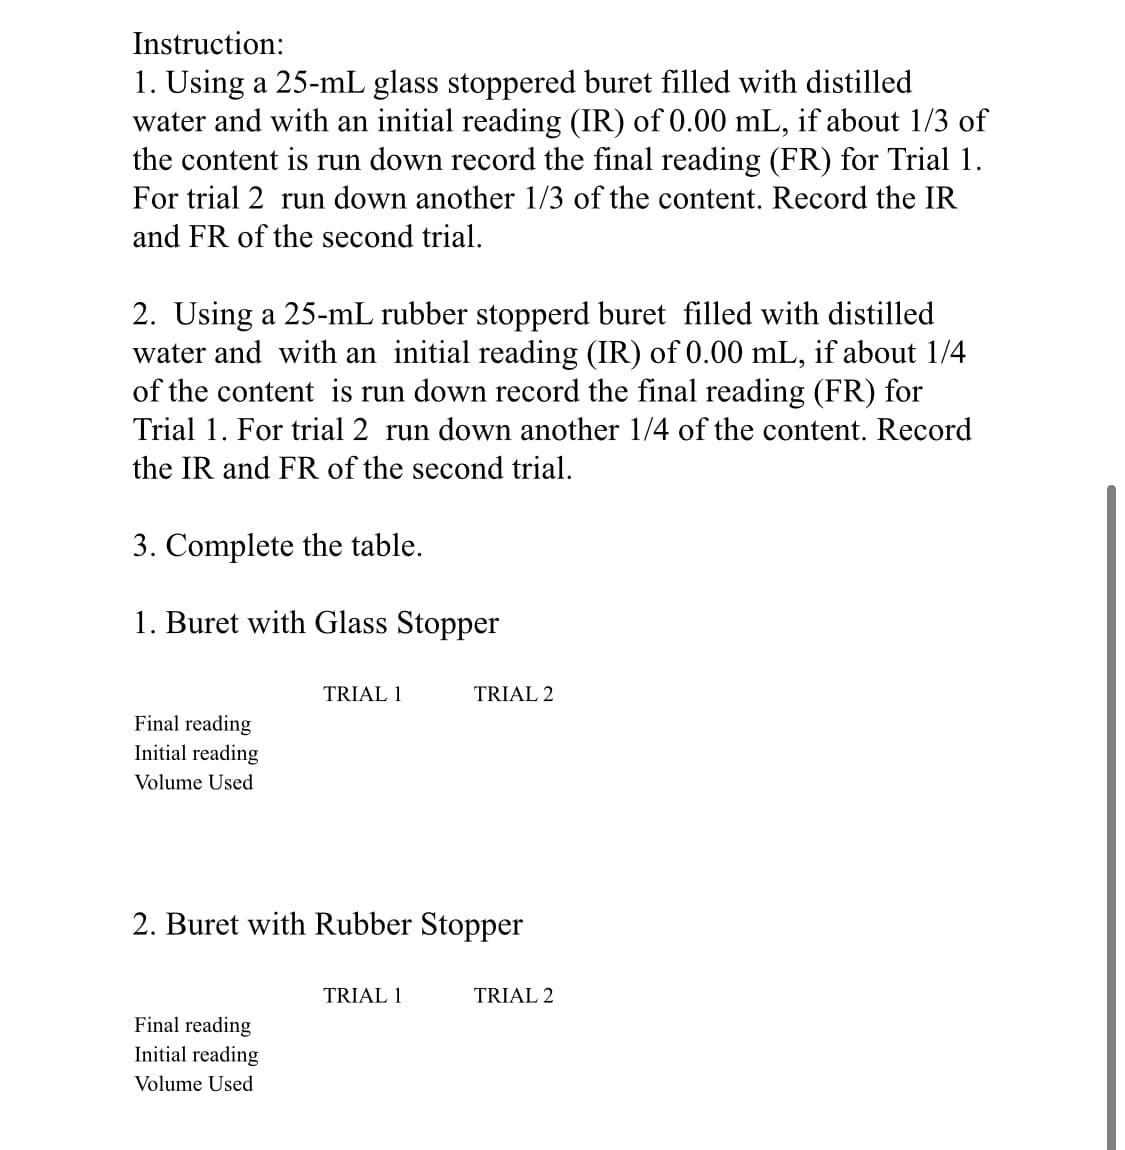 Instruction:
1. Using a 25-mL glass stoppered buret filled with distilled
water and with an initial reading (IR) of 0.00 mL, if about 1/3 of
the content is run down record the final reading (FR) for Trial 1.
For trial 2 run down another 1/3 of the content. Record the IR
and FR of the second trial.
2. Using a 25-mL rubber stopperd buret filled with distilled
water and with an initial reading (IR) of 0.00 mL, if about 1/4
of the content is run down record the final reading (FR) for
Trial 1. For trial 2 run down another 1/4 of the content. Record
the IR and FR of the second trial.
3. Complete the table.
1. Buret with Glass Stopper
TRIAL 1
TRIAL 2
Final reading
Initial reading
Volume Used
2. Buret with Rubber Stopper
TRIAL 1
TRIAL 2
Final reading
Initial reading
Volume Used
